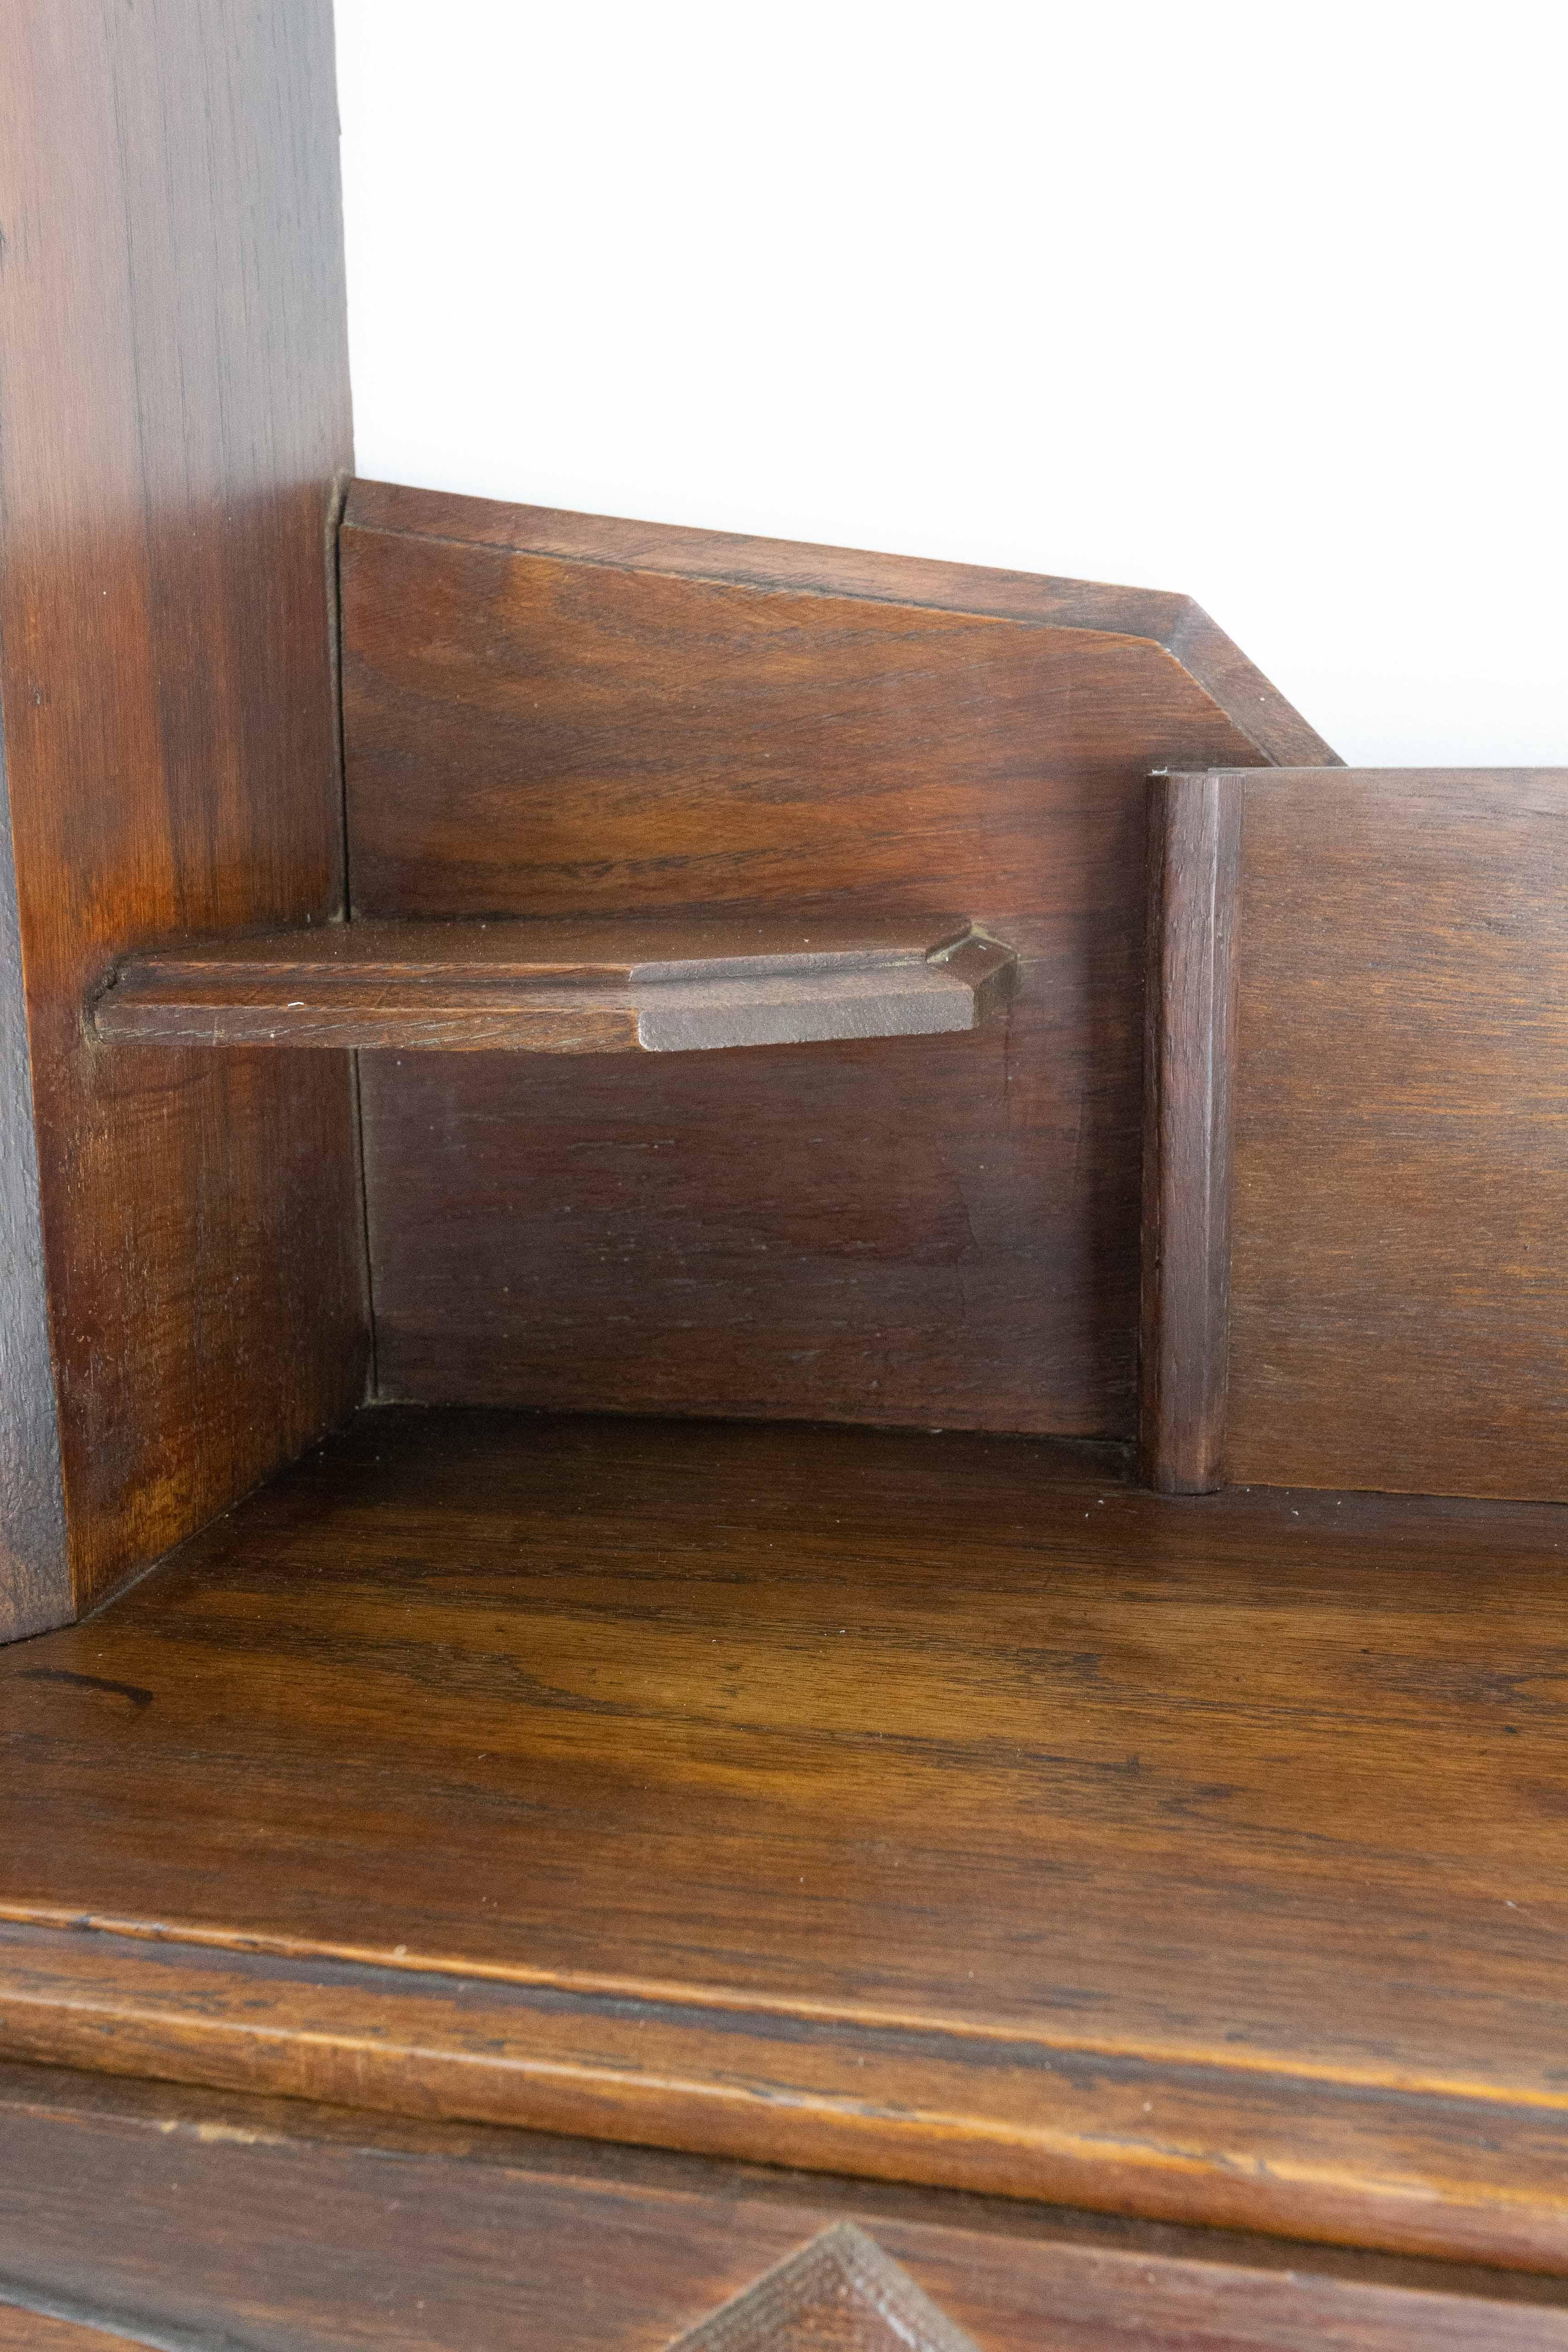 Art Deco Entry Shelf with Cabinet and Drawers Swiss Alp Style, French, 1930 For Sale 4